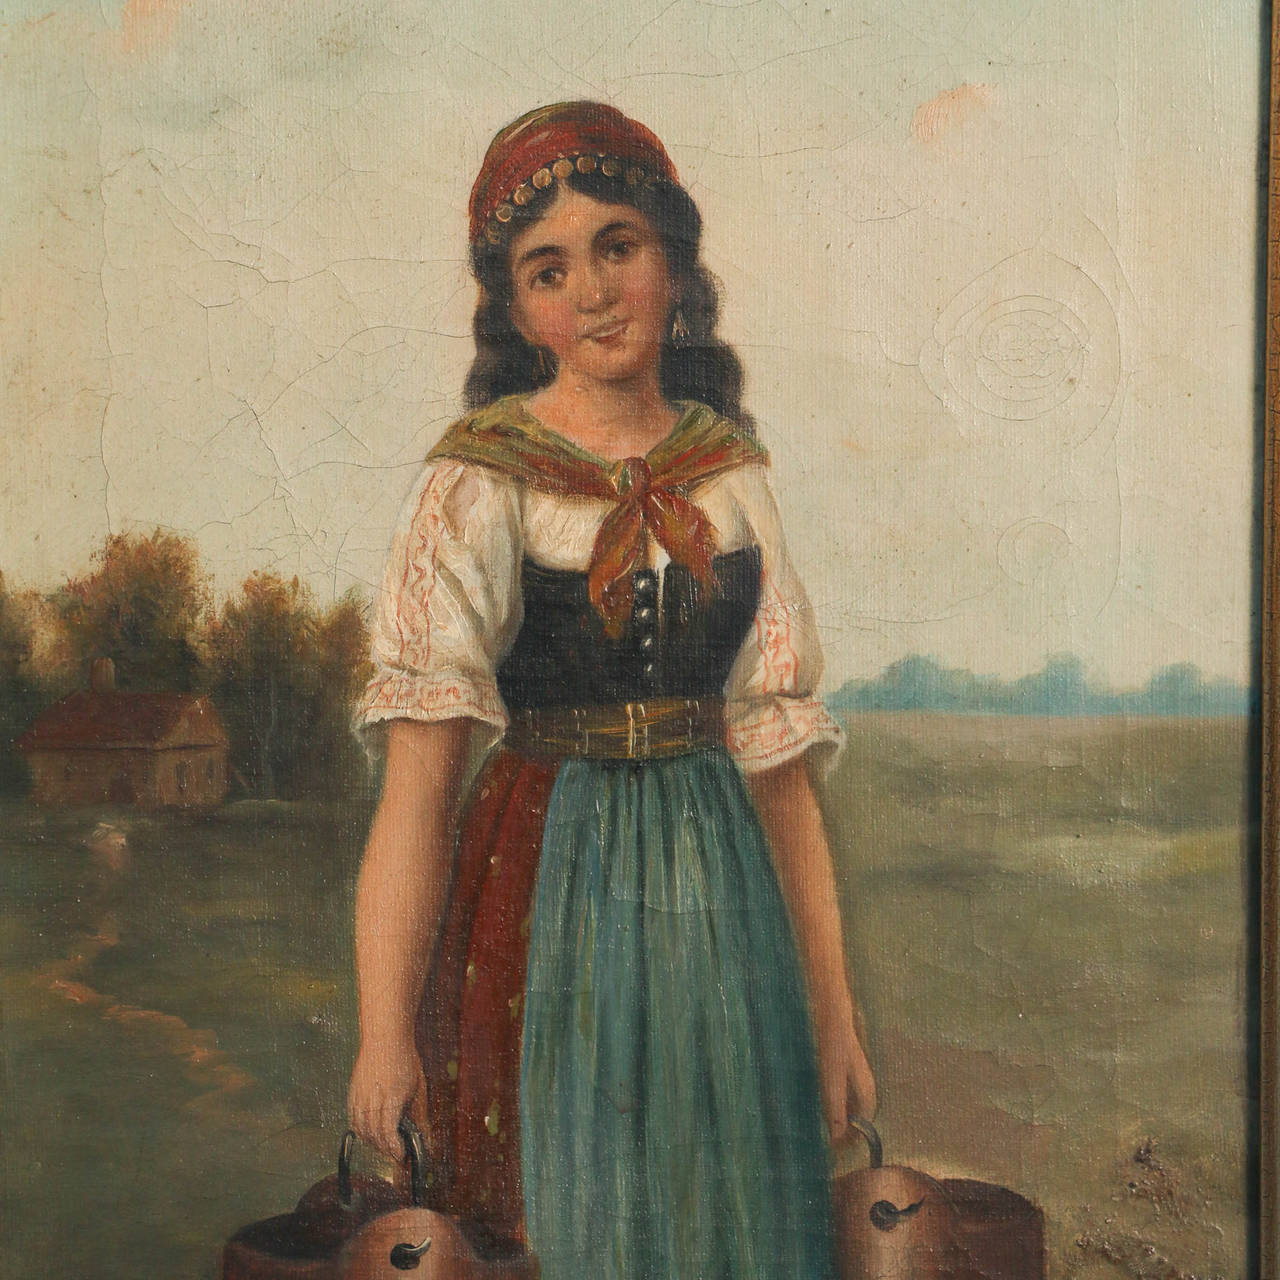 Original Oil on Canvas, Young Woman with Pails. Southern Europe setting, signed 